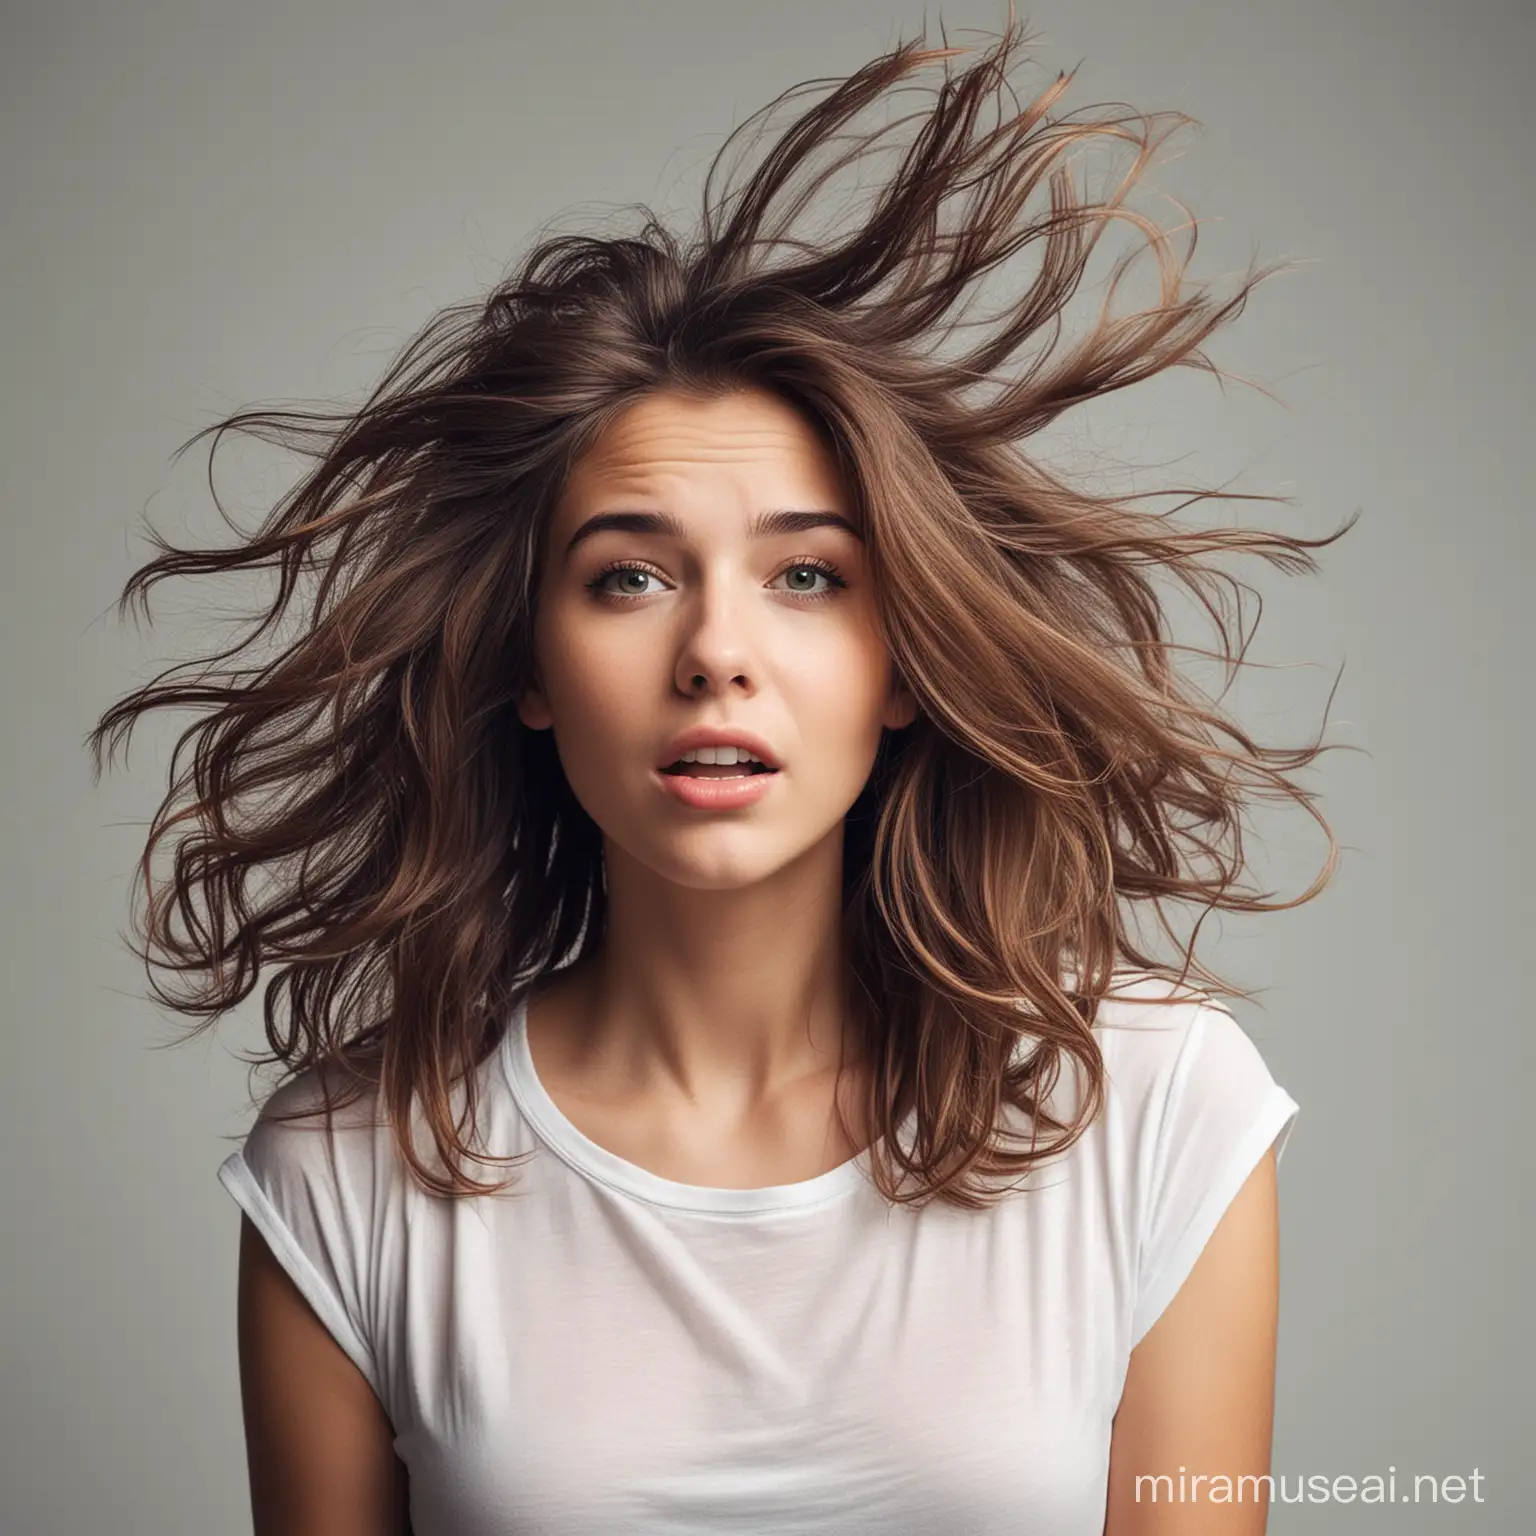 A picture of a girl with her hair falling out